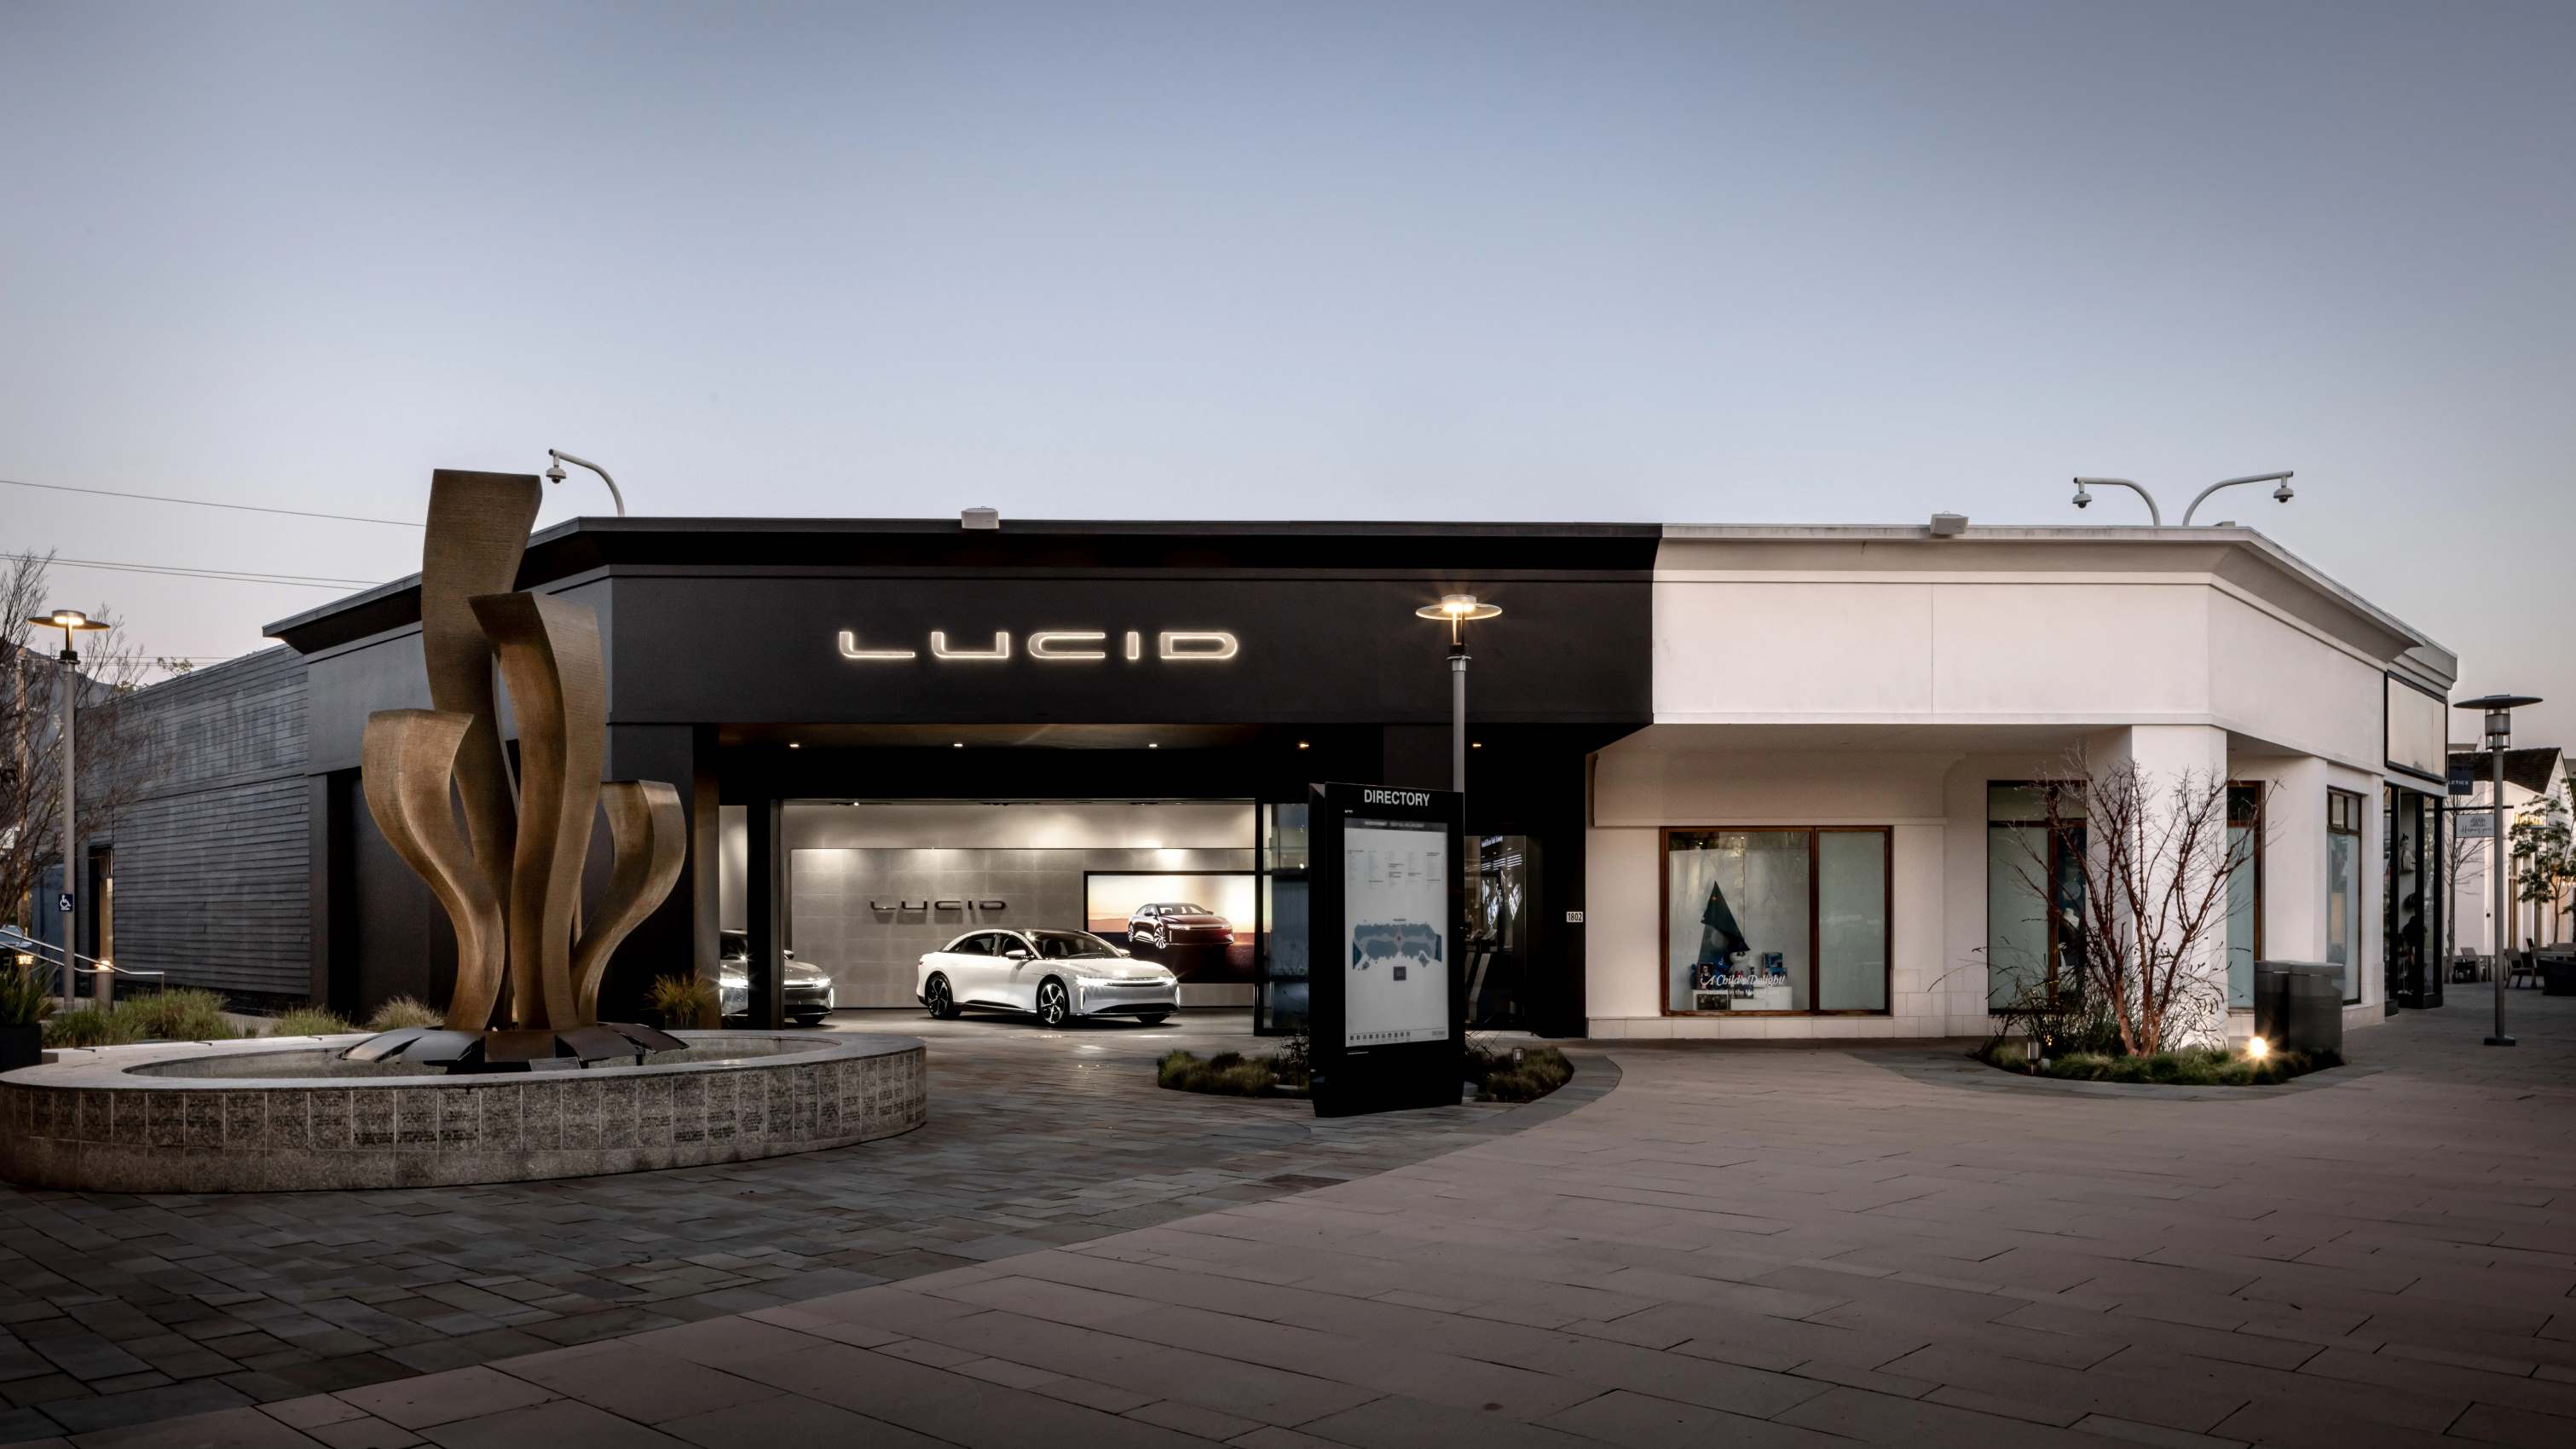 Lucid Opens EV Factory In Saudi Arabia, Strengthening Ties With Its Largest Shareholder